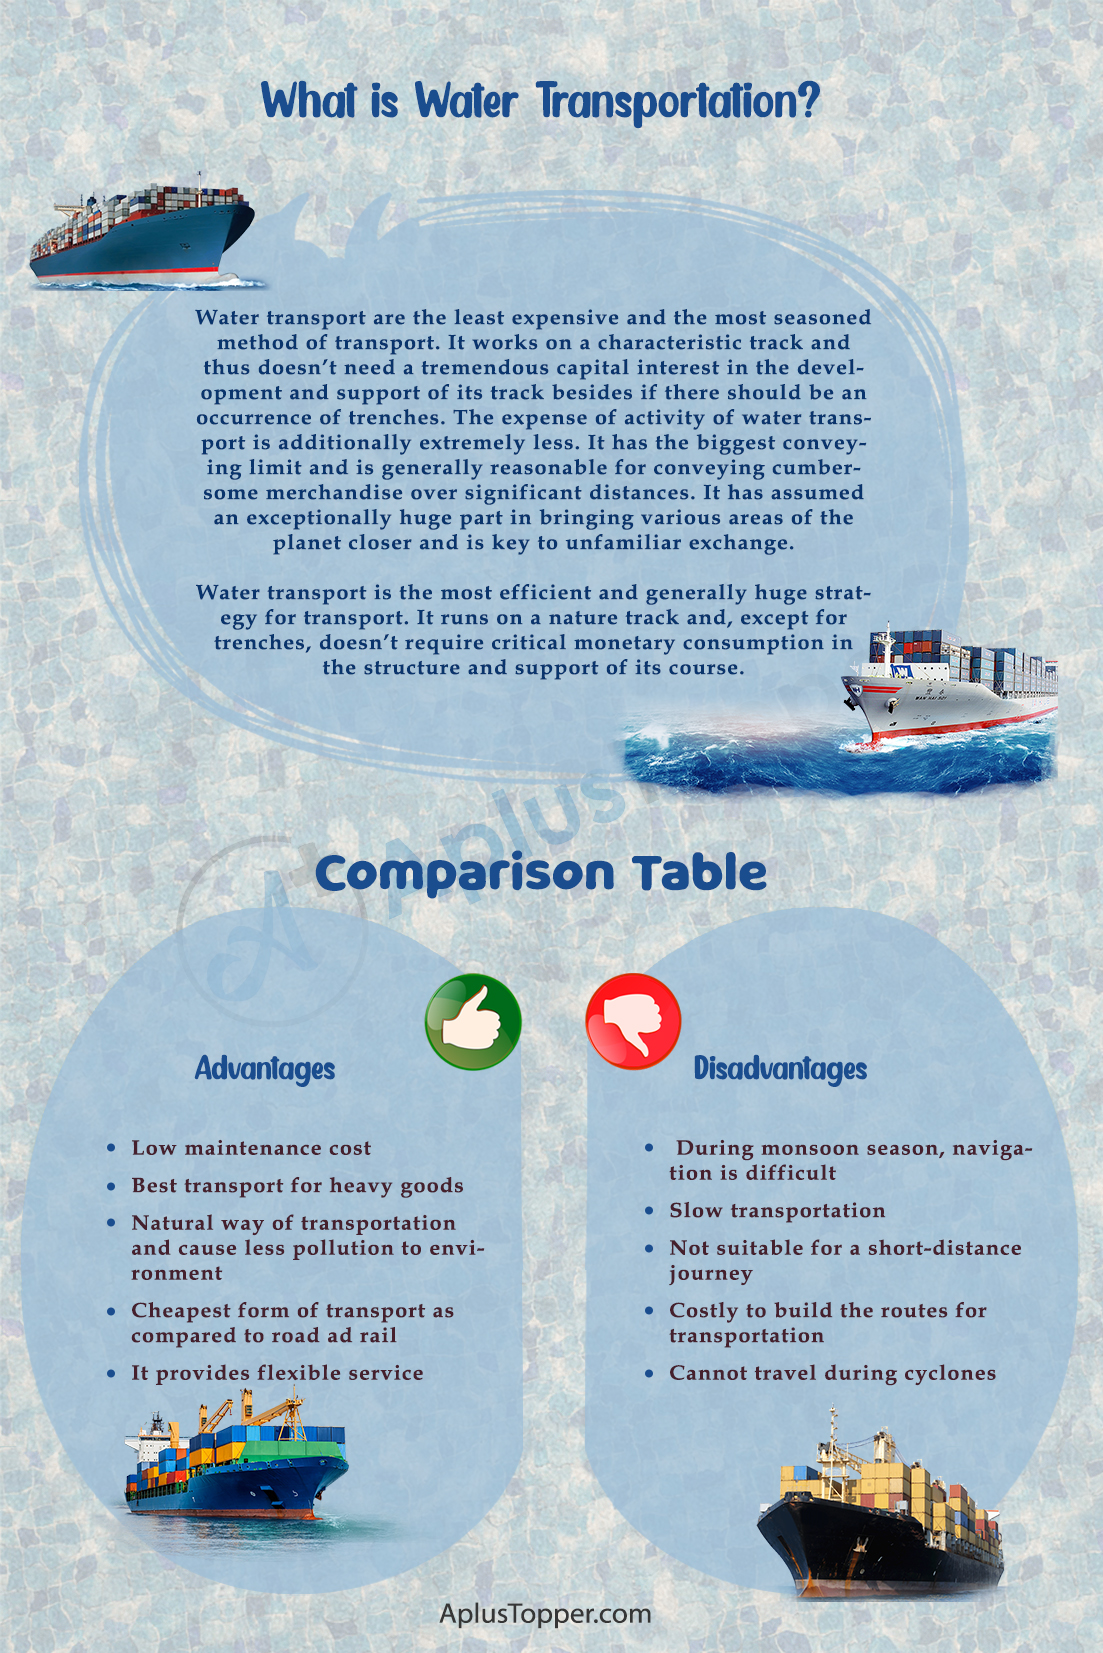 Water Transportation Advantages And Disadvantages What Is Water Transportation Pros And Cons 2138